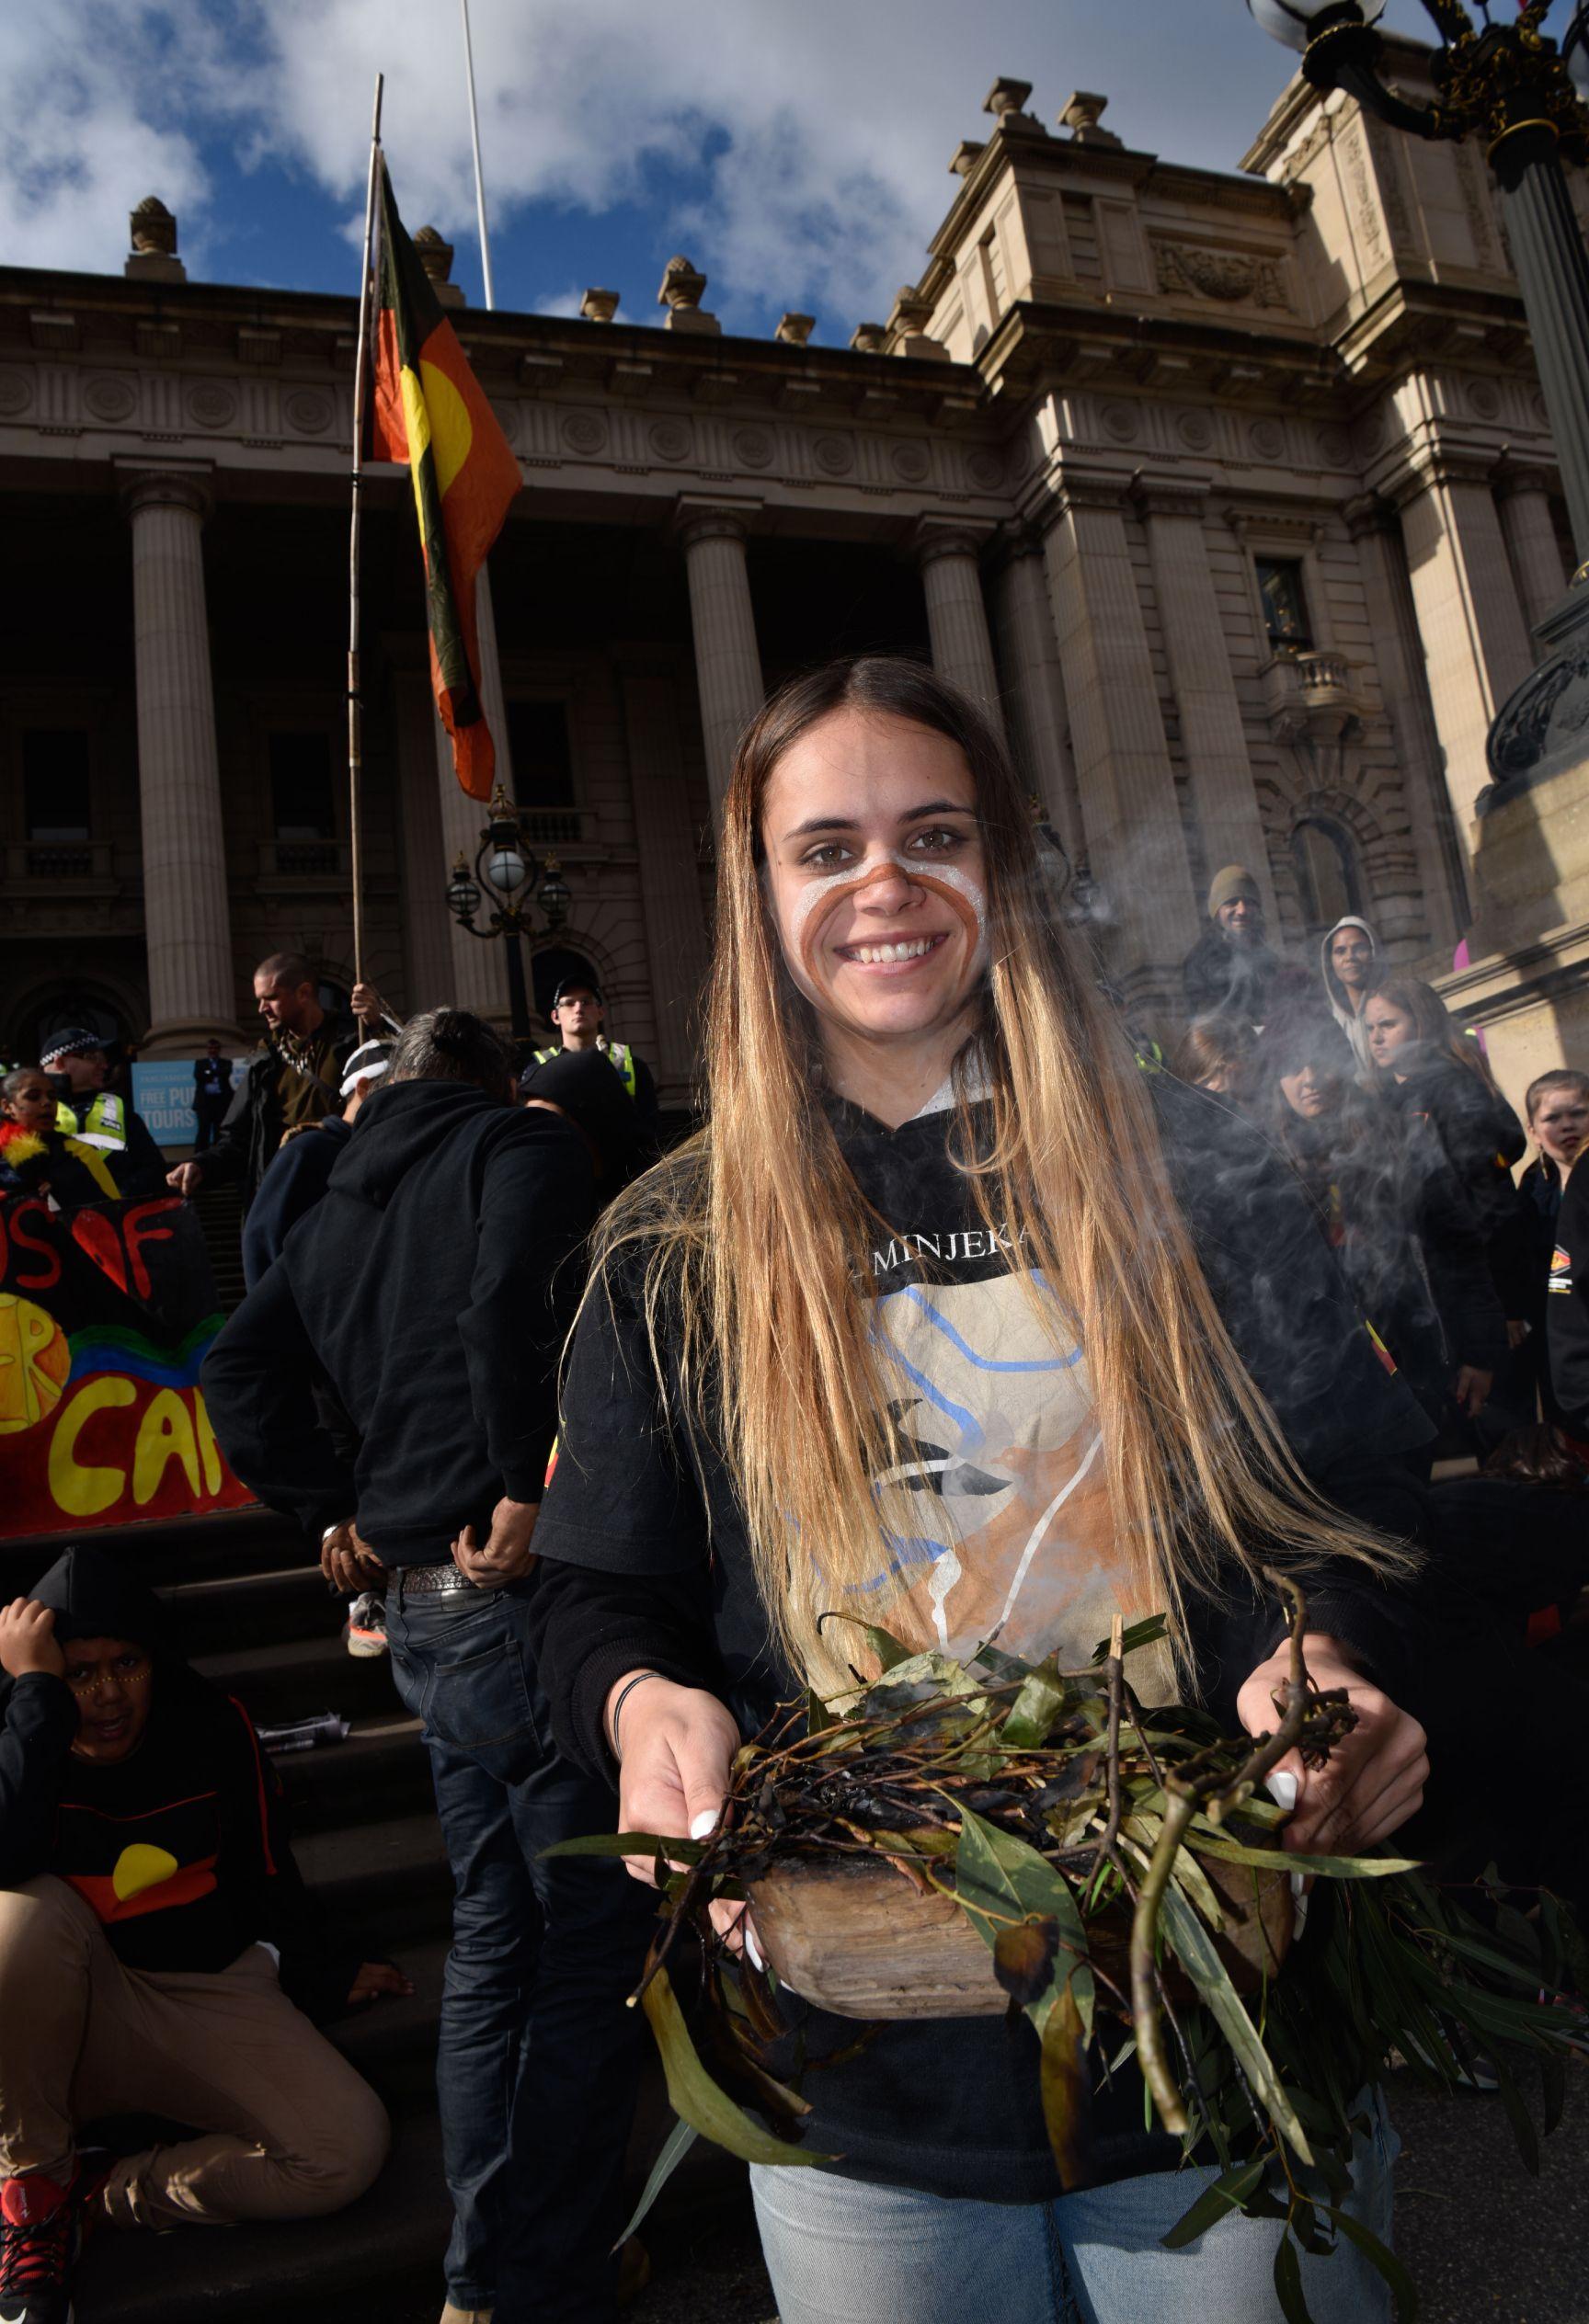 A young indigenous woman wearing traditional face paint and a shirt that reads "Wominjeka" stands in front of a crowd of people outside Melbourne's Parliament House. She is holding materials for a smoking ceremony.